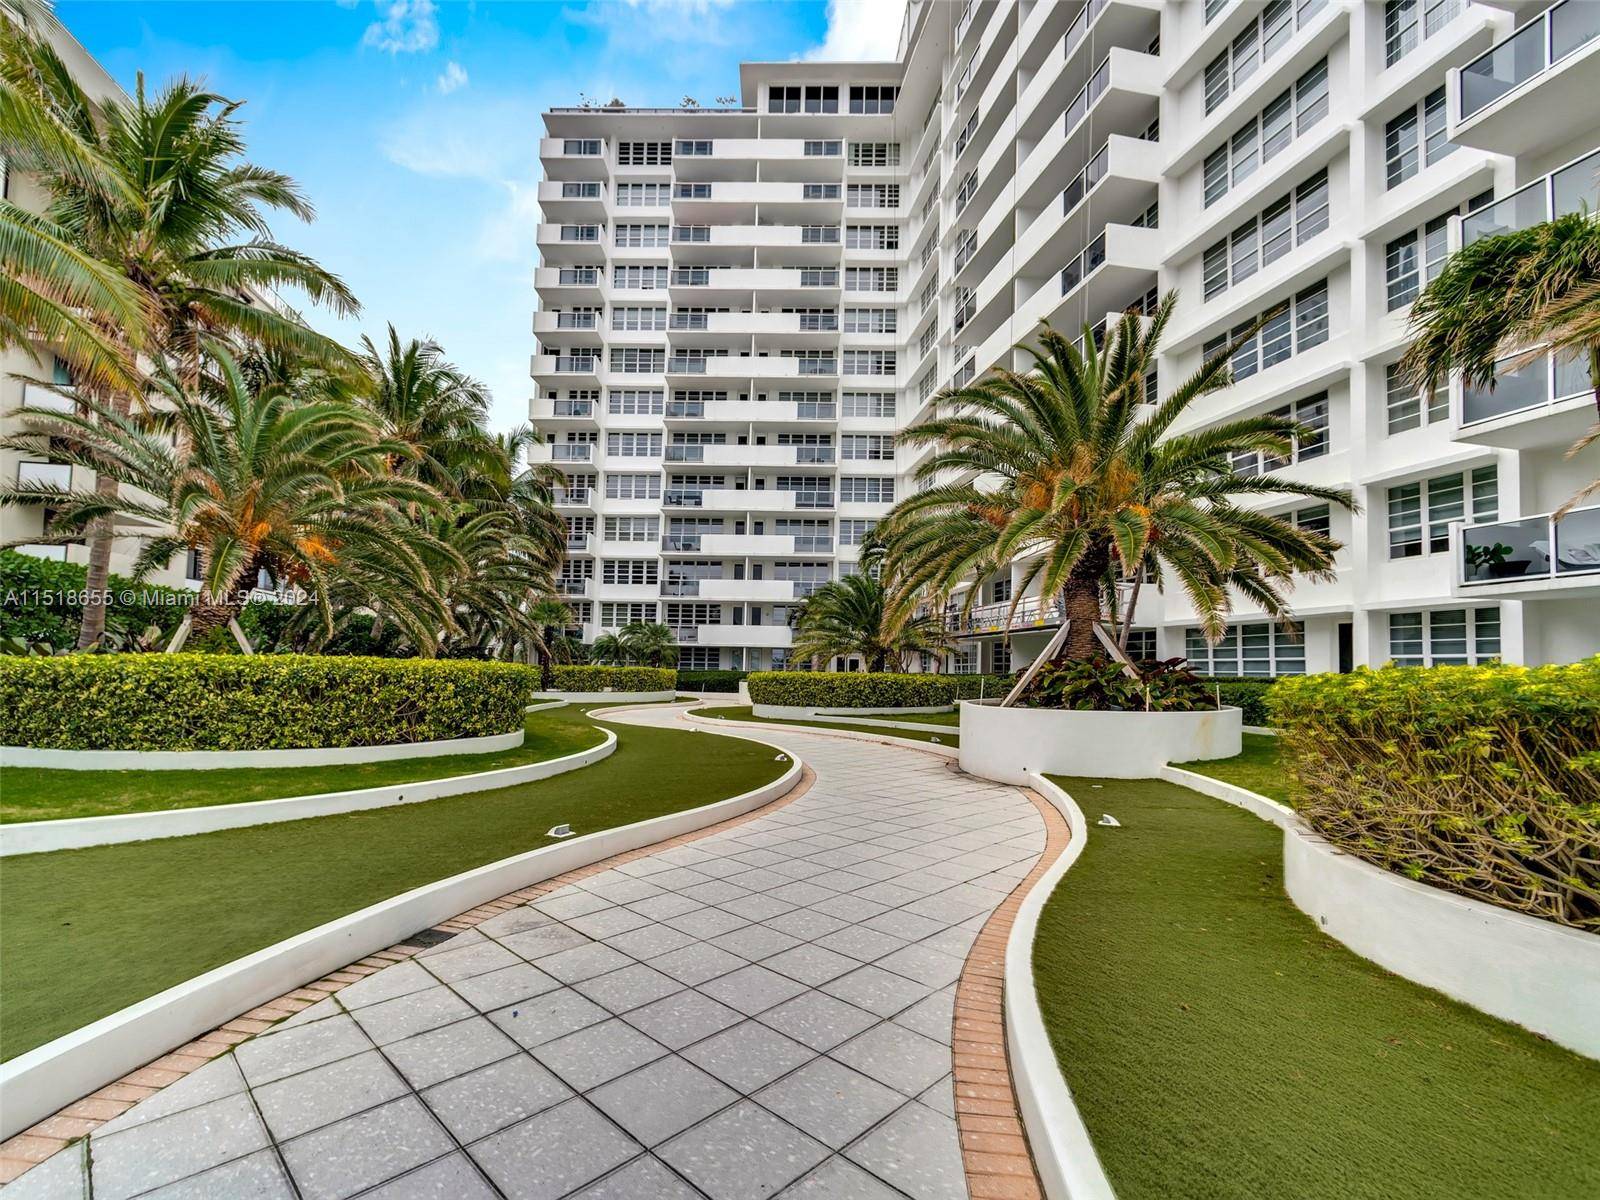 A MUST SEE, OCEAN FRONT BUILDING IN THE HEART OF SOUTH BEACH, RIGHT WHERE LINCOLN ROAD MEETS THE OCEAN, JUST STEPS TO THE POOL AND THE BEACH.